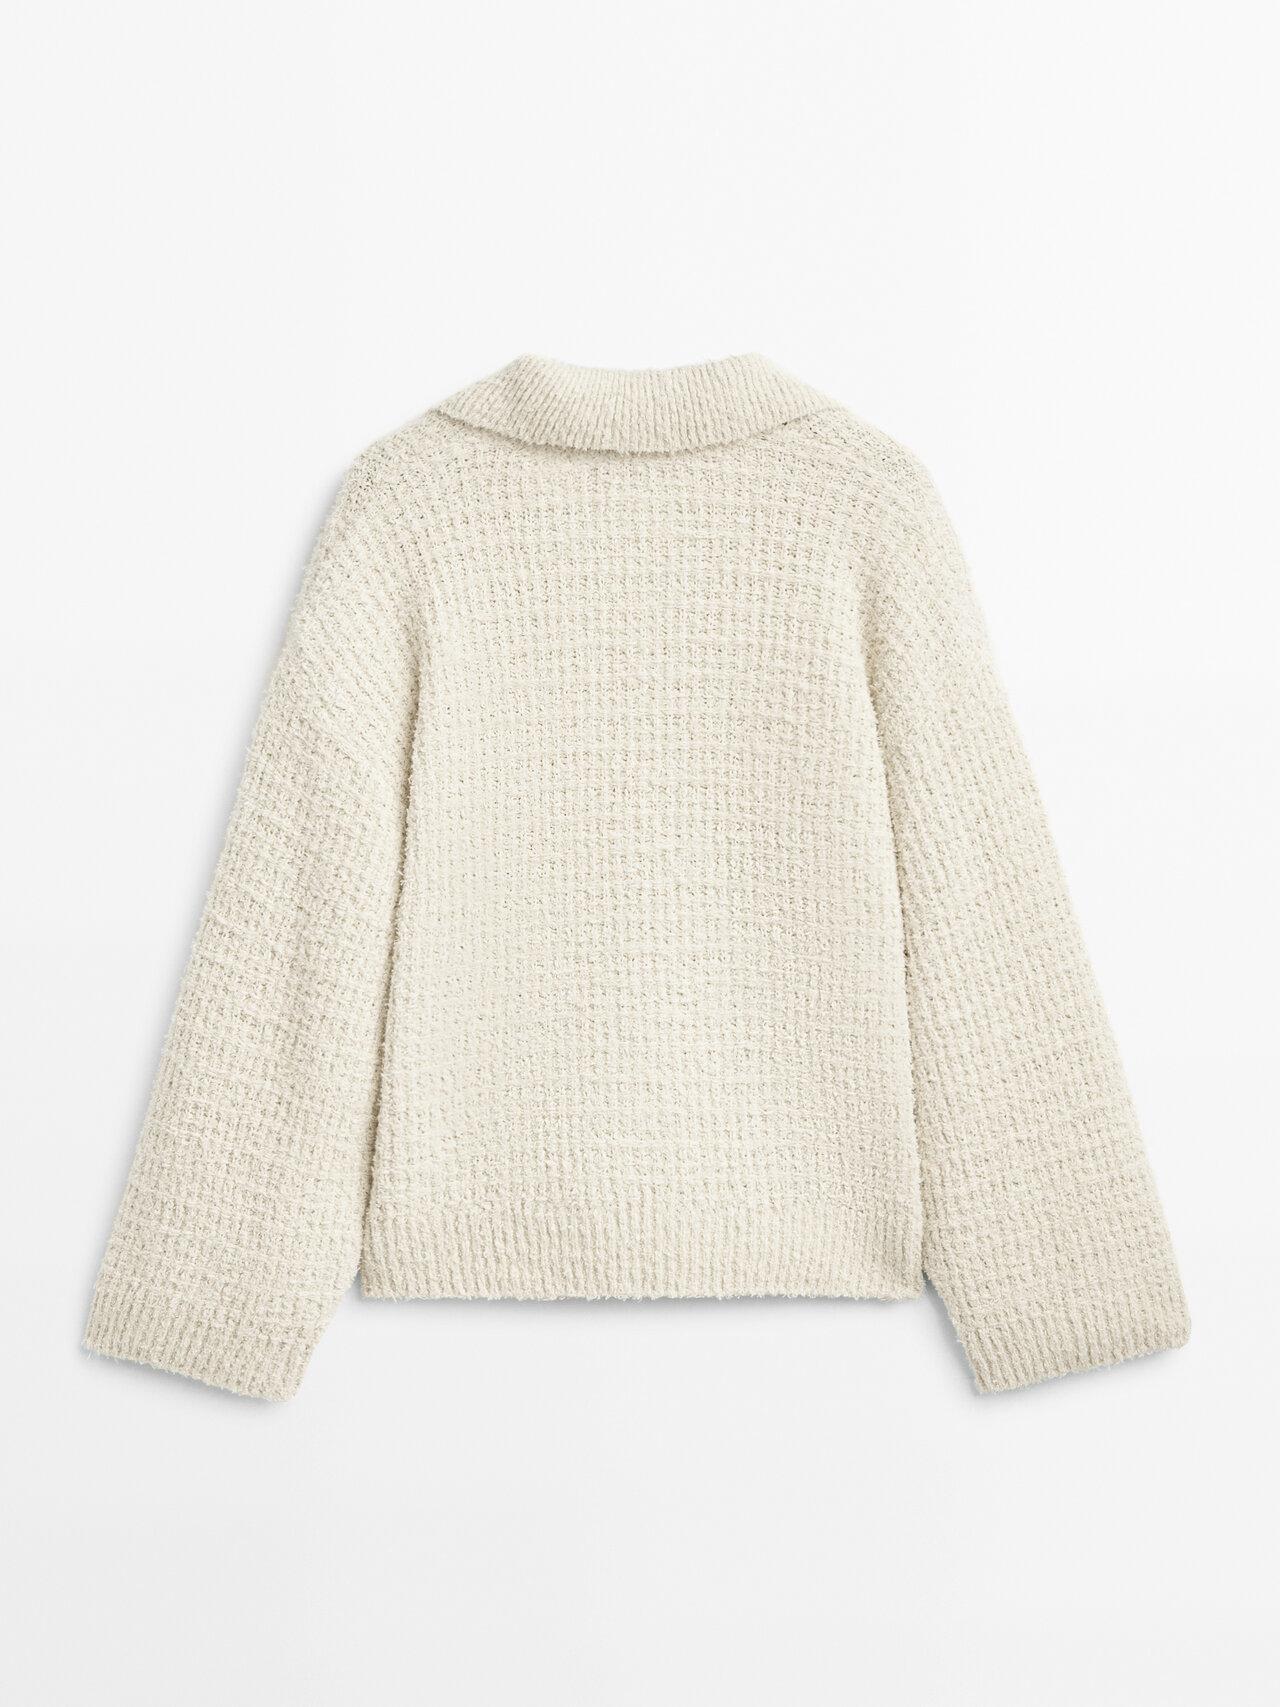 MASSIMO DUTTI Textured Knit Polo Collar Sweater in Natural | Lyst